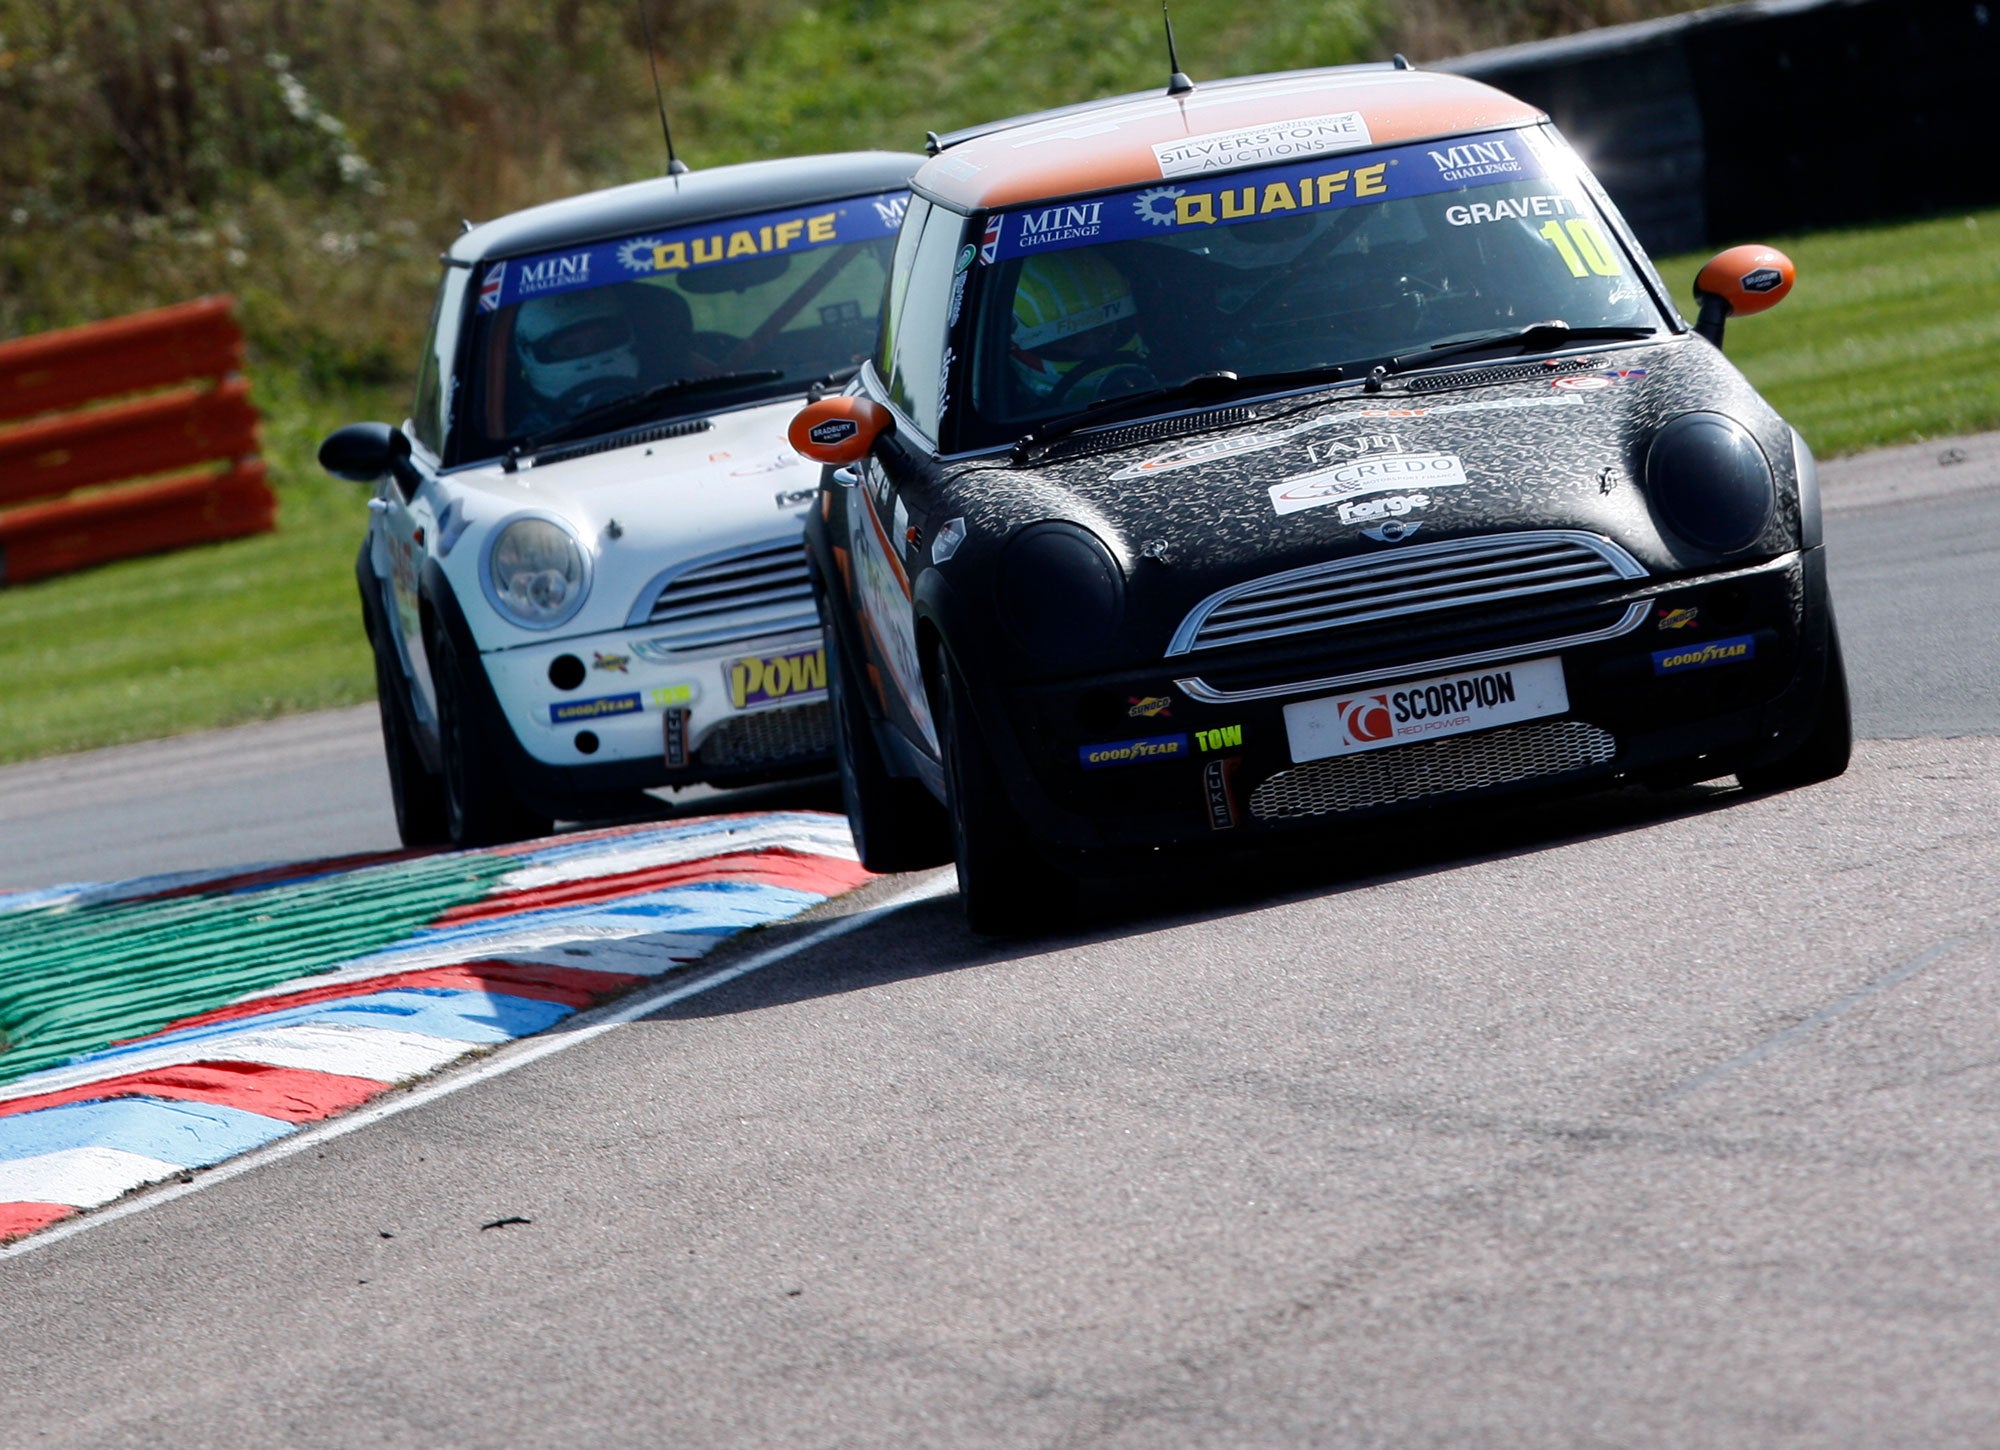 Bradley Gravett son of BTCC British Touring Car Champion Robb Gravett in the Cooper Trophy at Thruxton in 2020 with Alex Nevill  with Graves Motorsport Mini Challenge JCW Cooper Racing Driver LIQUI MOLY LM Performance Omologato Watches